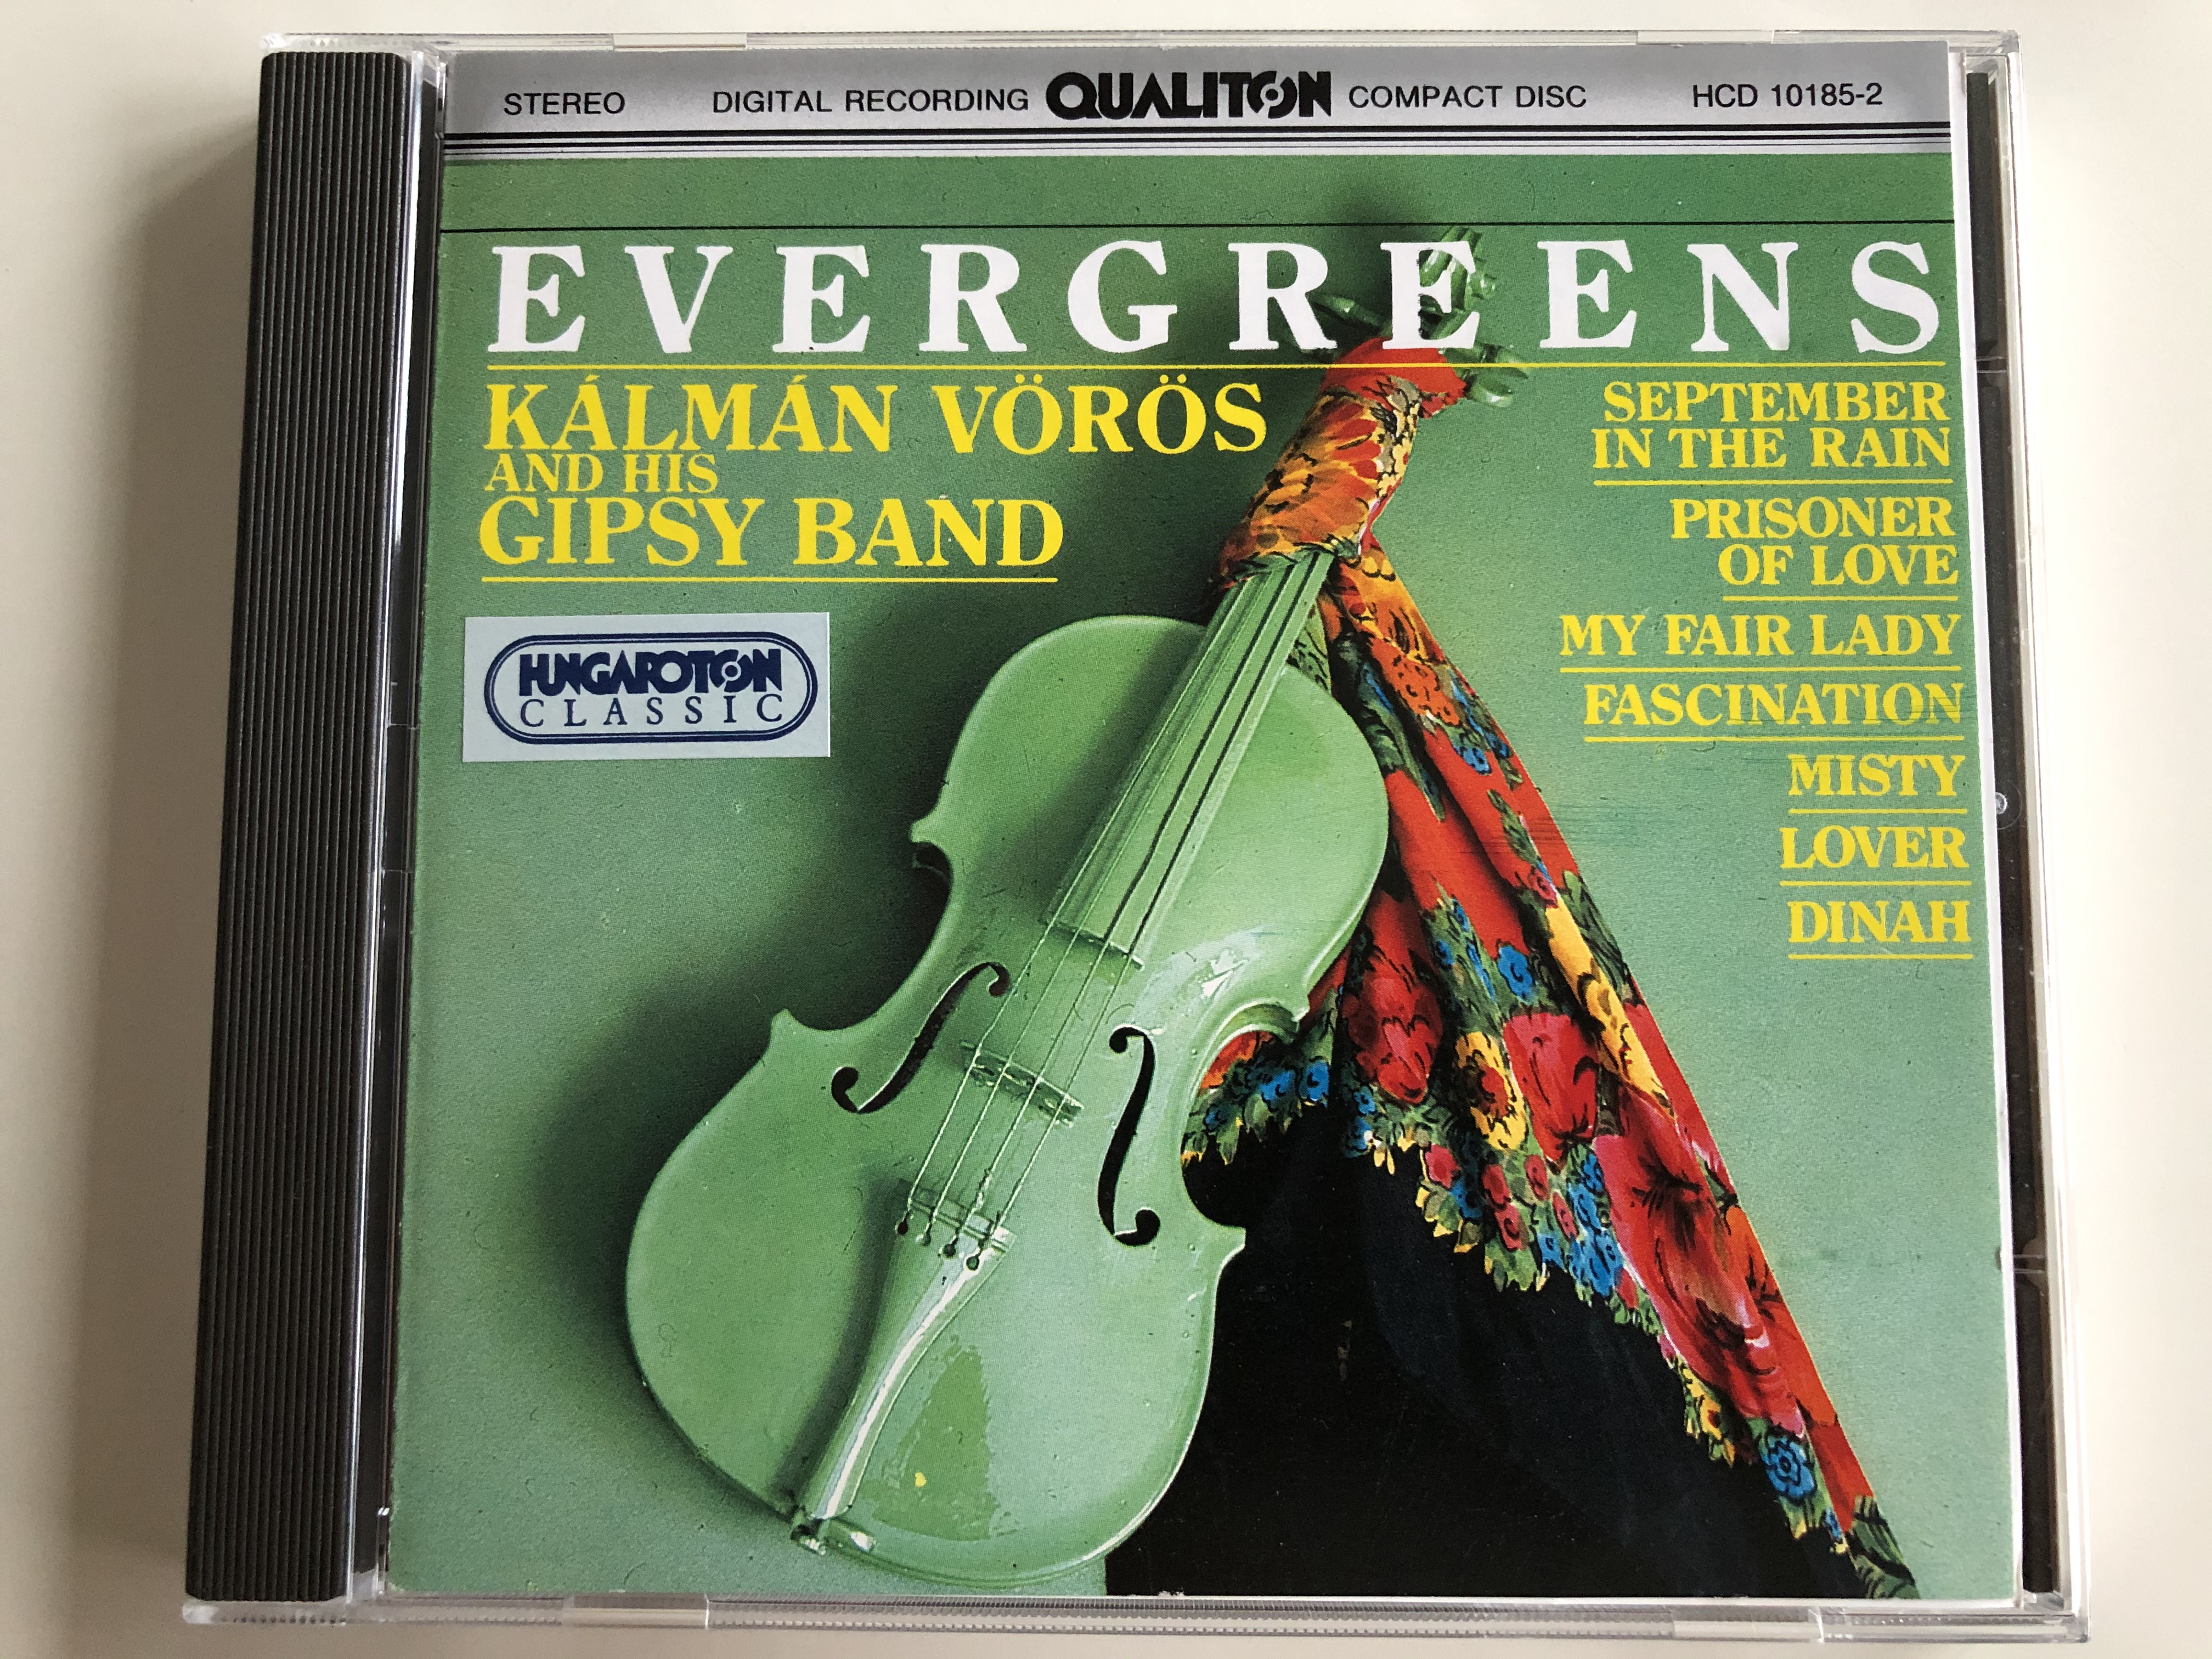 evergreens-k-lm-n-v-r-s-and-his-gipsy-band-september-in-the-rain-prisoner-of-love-my-fair-lady-fascination-misty-lover-dinah-qualiton-audio-cd-1994-stereo-hcd-10185-1-.jpg